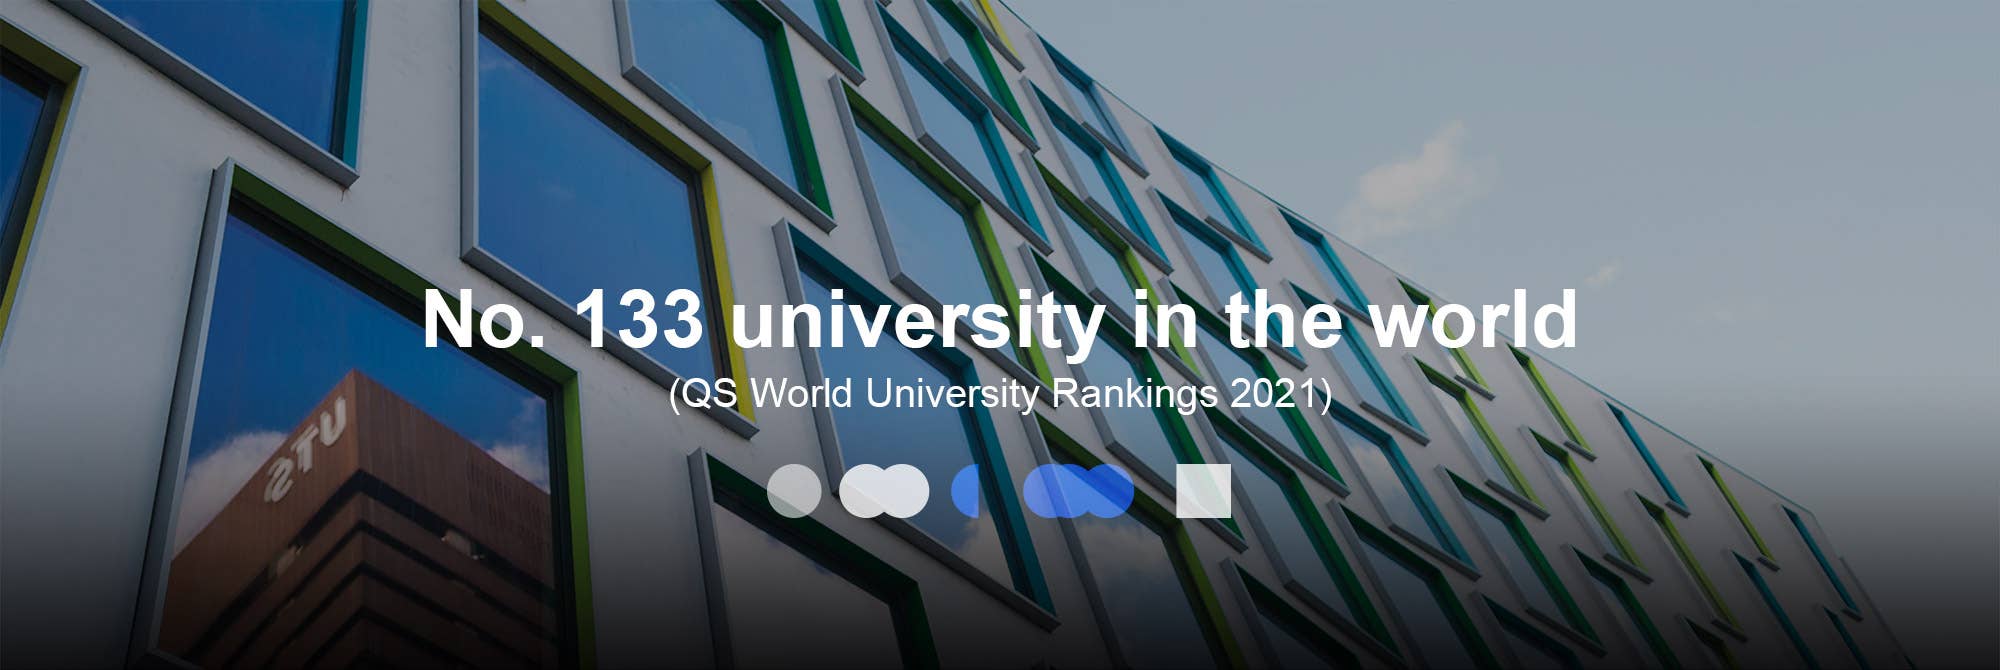 No. 133 university in the world